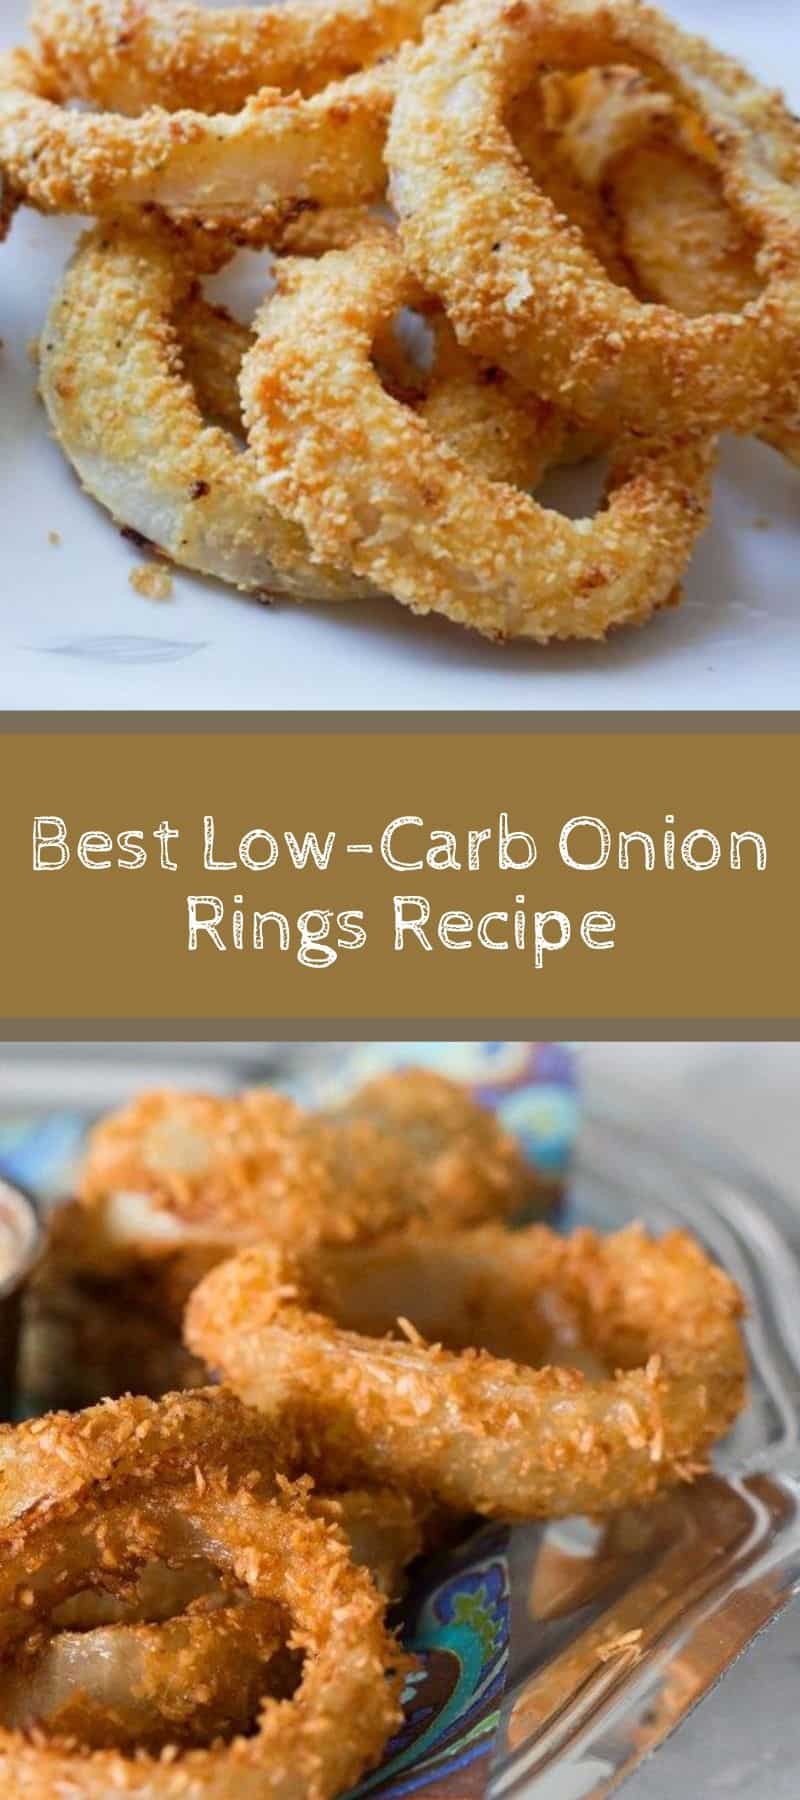 Best Low-Carb Onion Rings Recipe 3